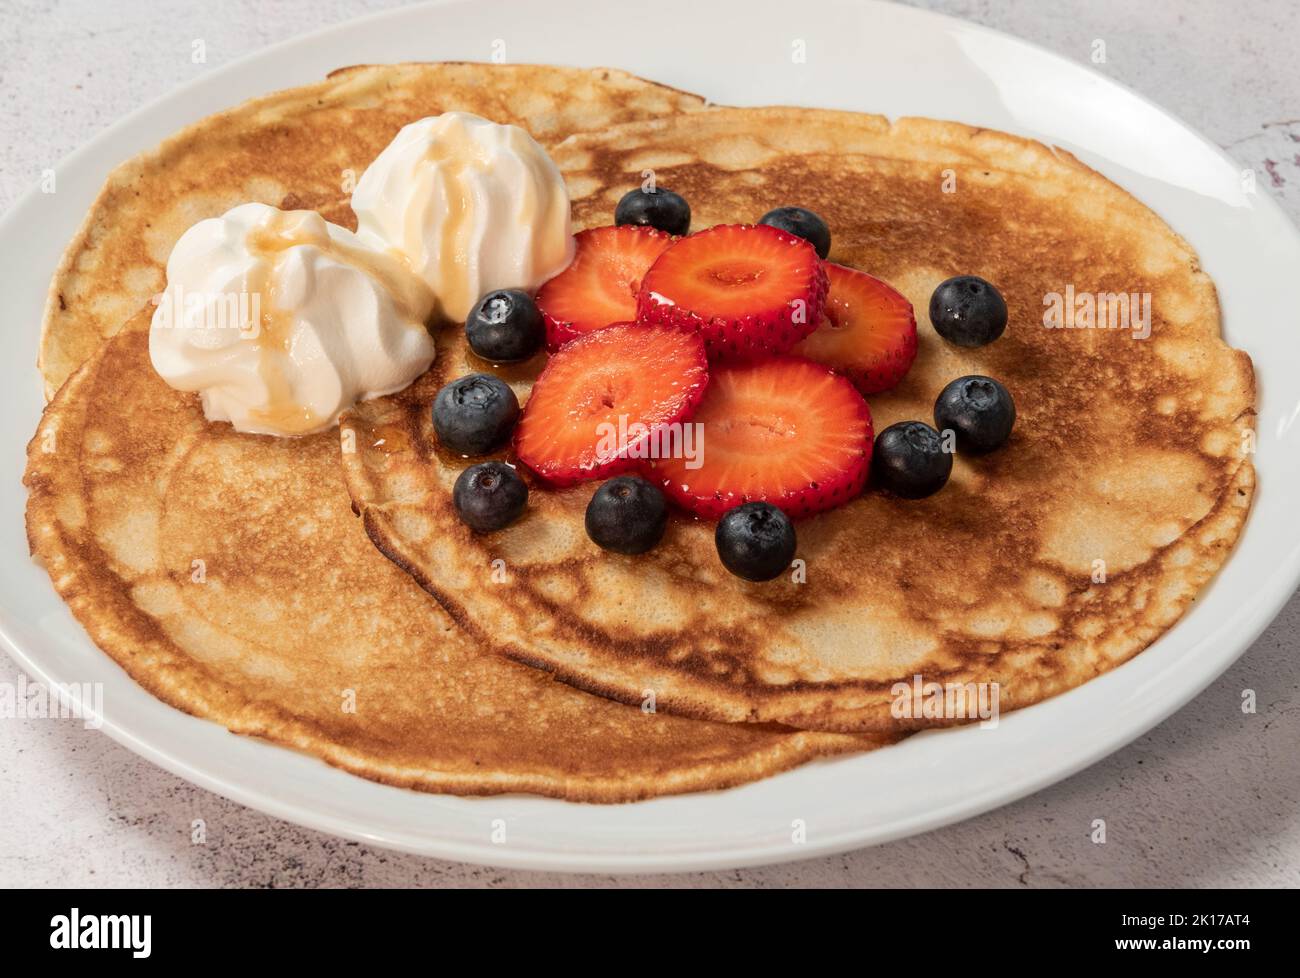 Pancakes with strawberries, blueberries, cream and maple syrup on plate Stock Photo